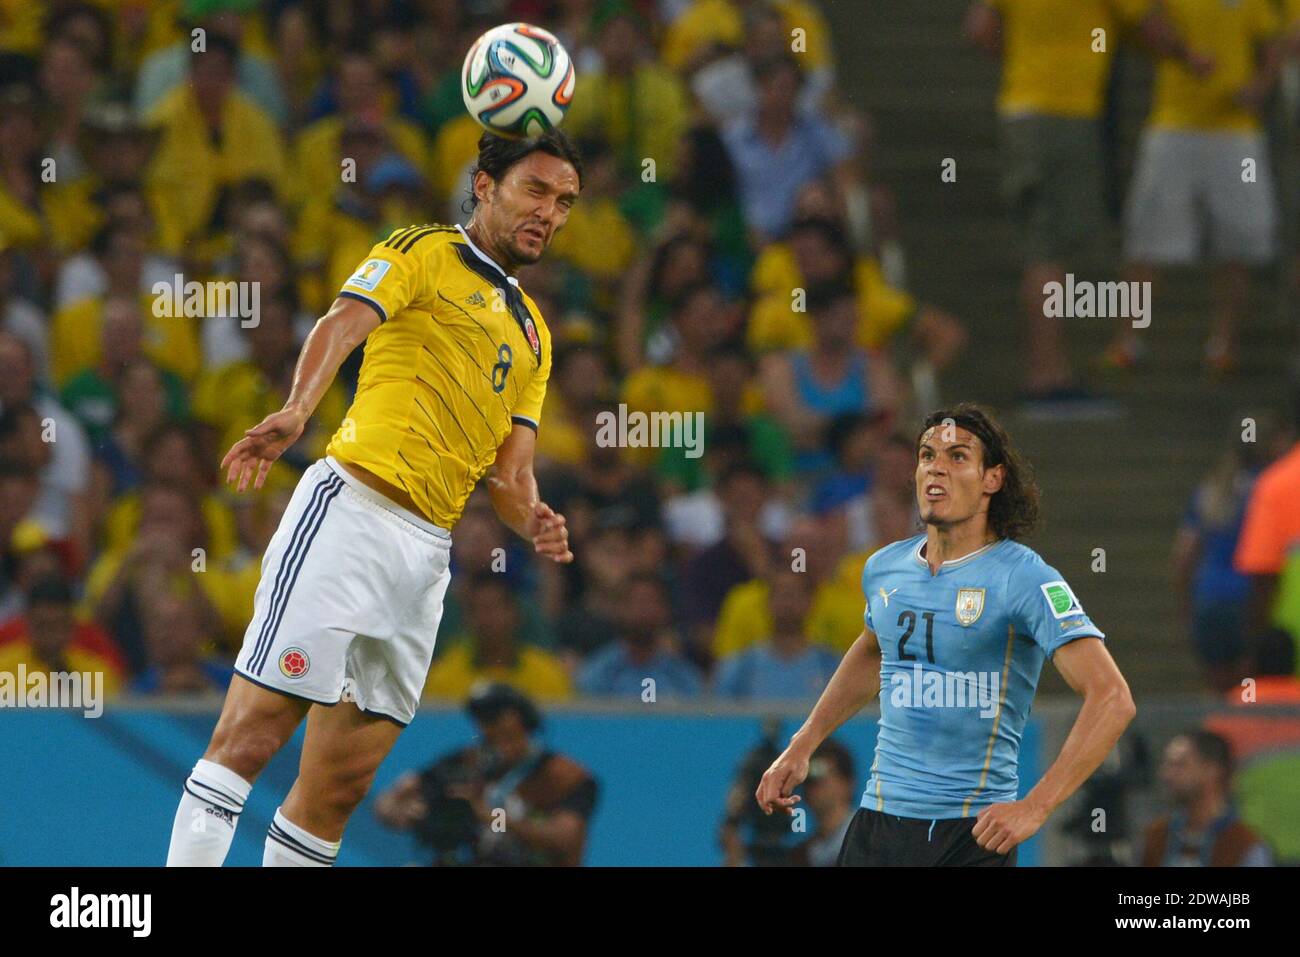 Colombia's Abel Aguilar during Soccer World Cup 2014 1/8 of final round match Colombia v Uruguay at Maracana Stadium, Rio de Janeiro, Brazil on June 28, 2014. Colombia won 2-0. Photo by Henri Szwarc/ABACAPRESS.COM Stock Photo